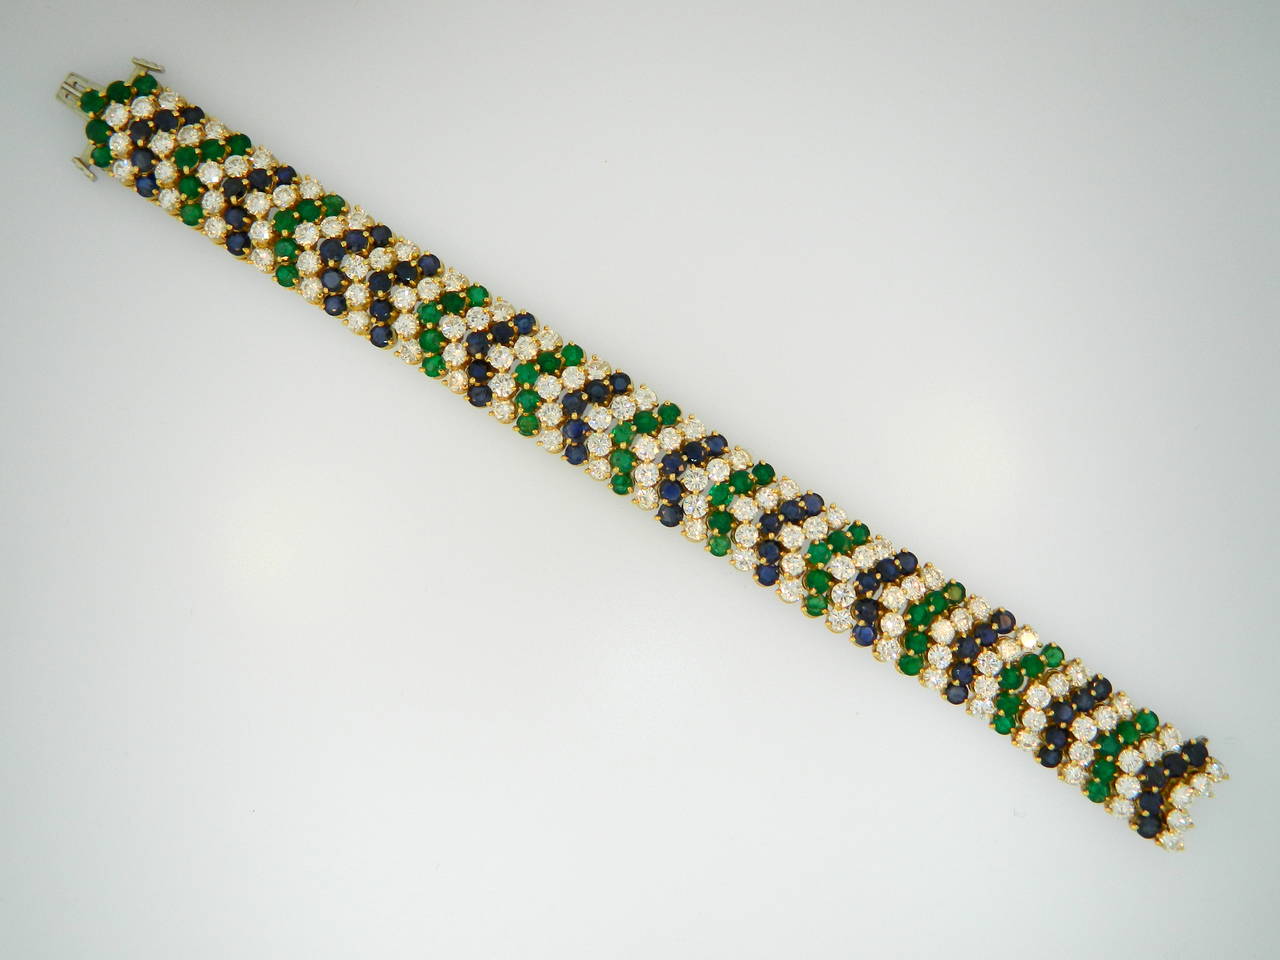 A 1960s 18kt yellow gold, diamond, emerald and sapphire bracelet containing over 13+ carats of fine round brilliant cut diamonds, 5+ Carats of emeralds and 5+ carats of sapphires.  Beautifully made!